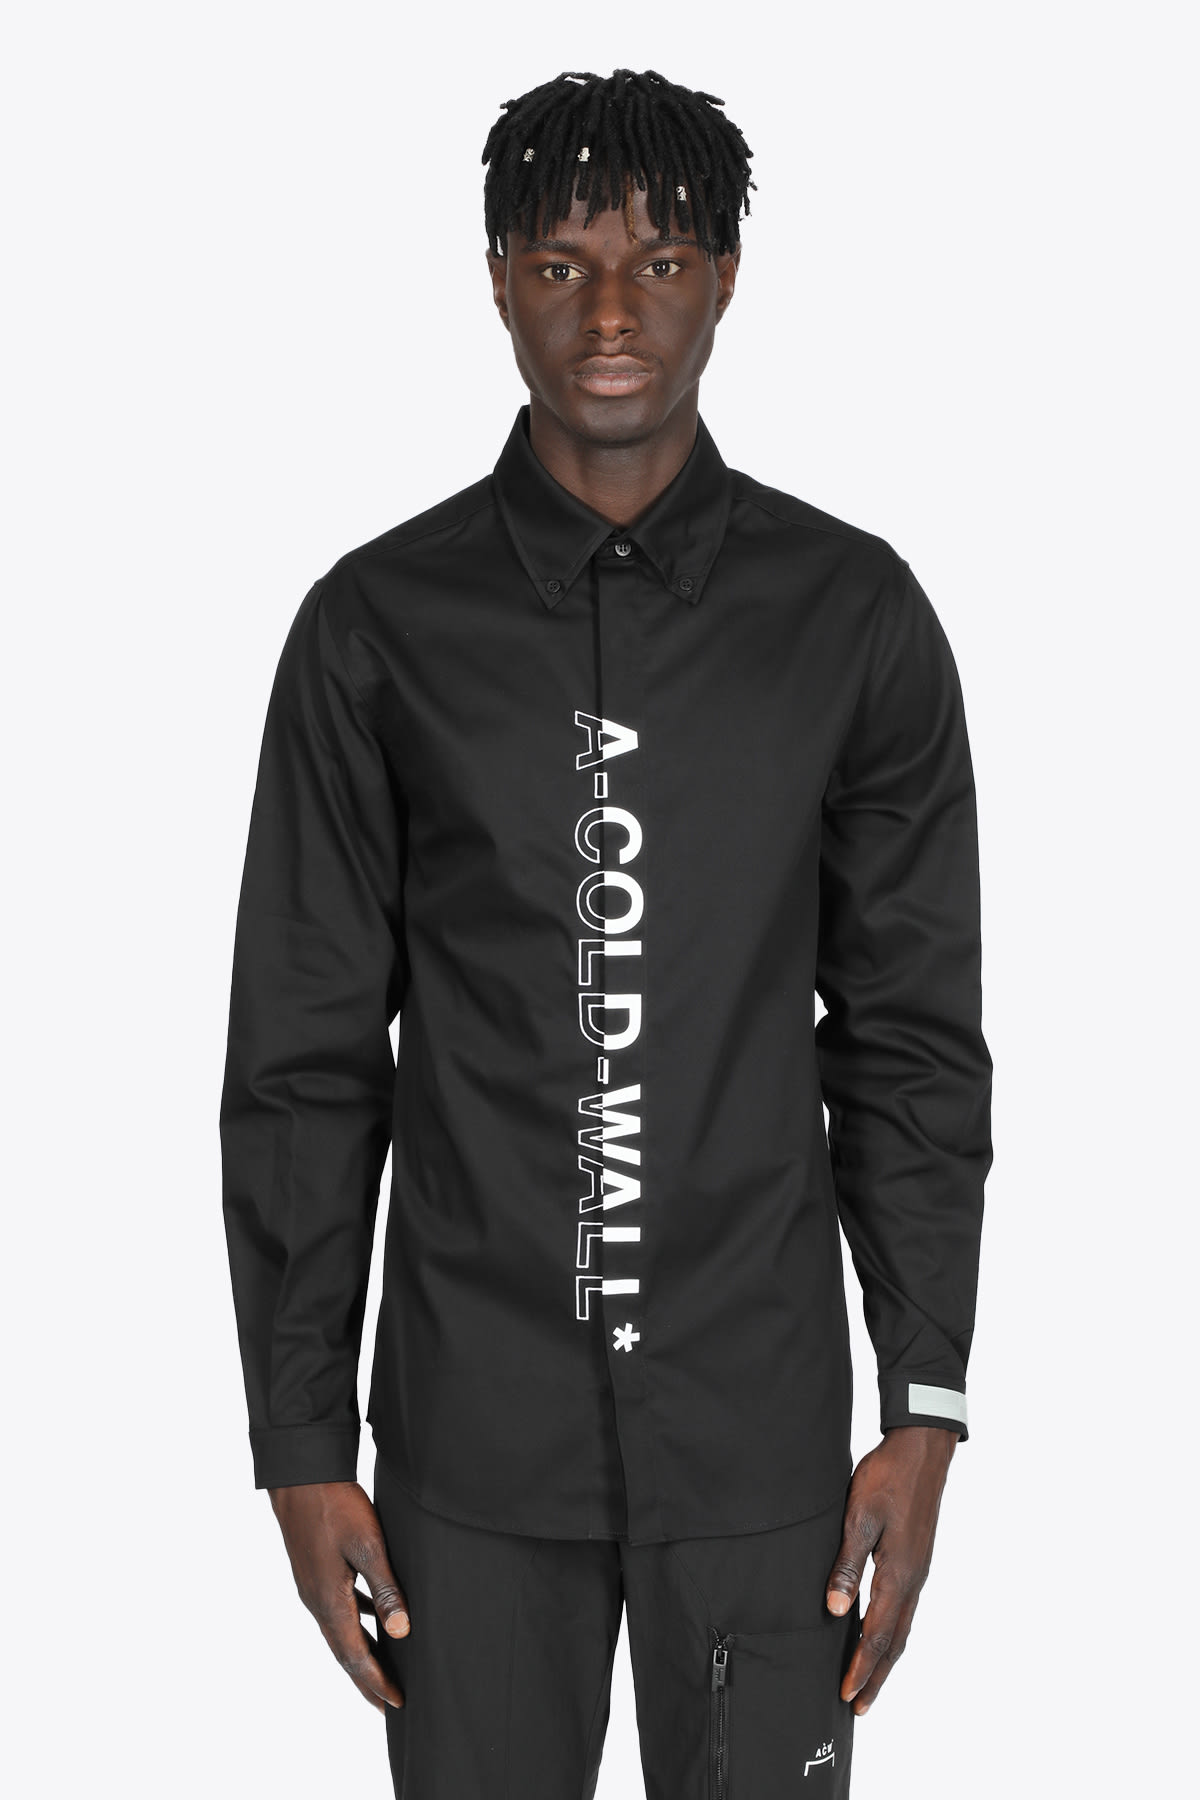 A-COLD-WALL Logo Branded Shirt Black cotton shirt with front logo embroidery